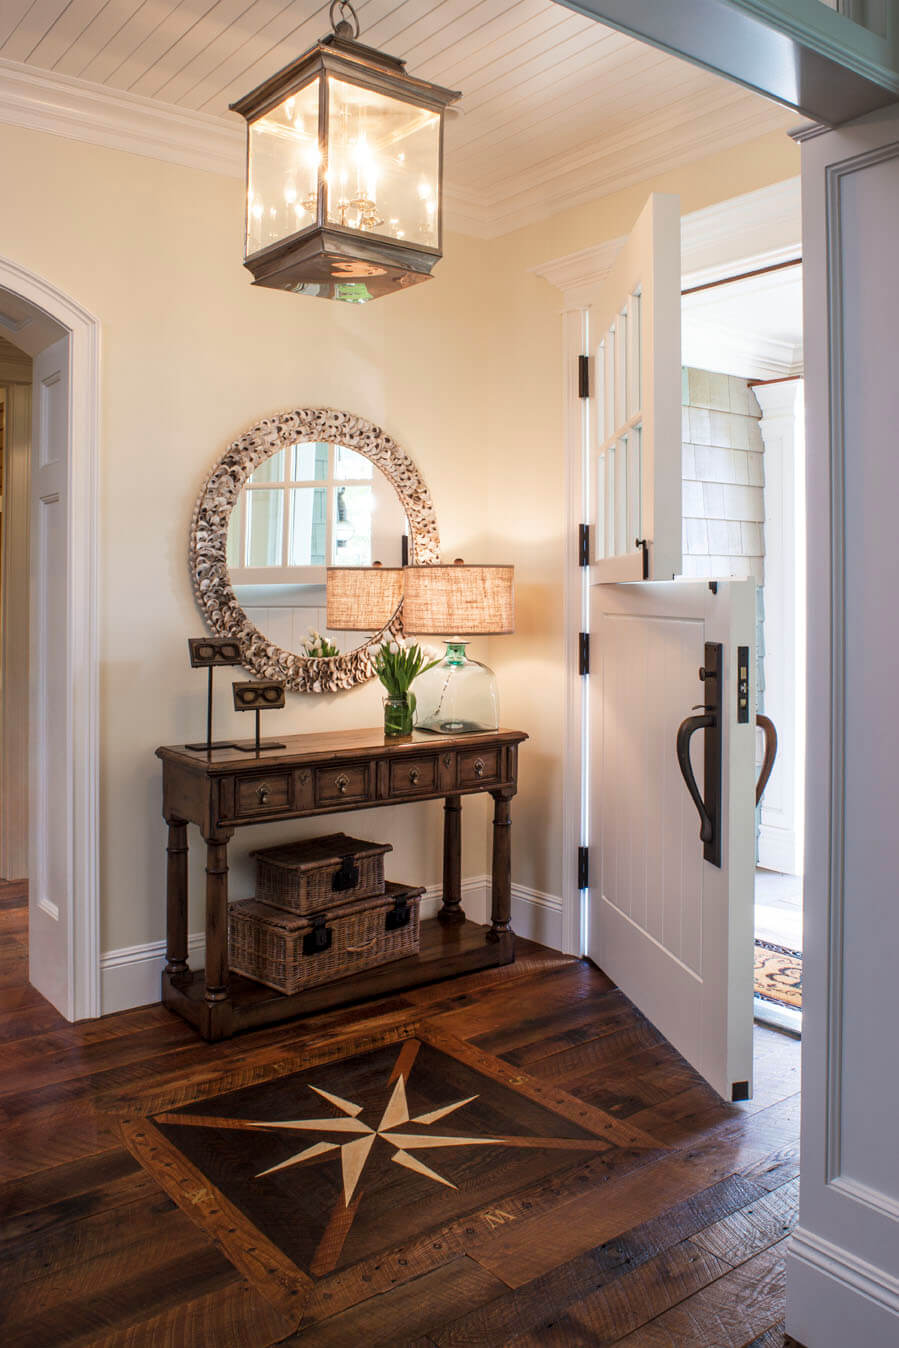 Oversized Entry Light Welcomes with Warmth